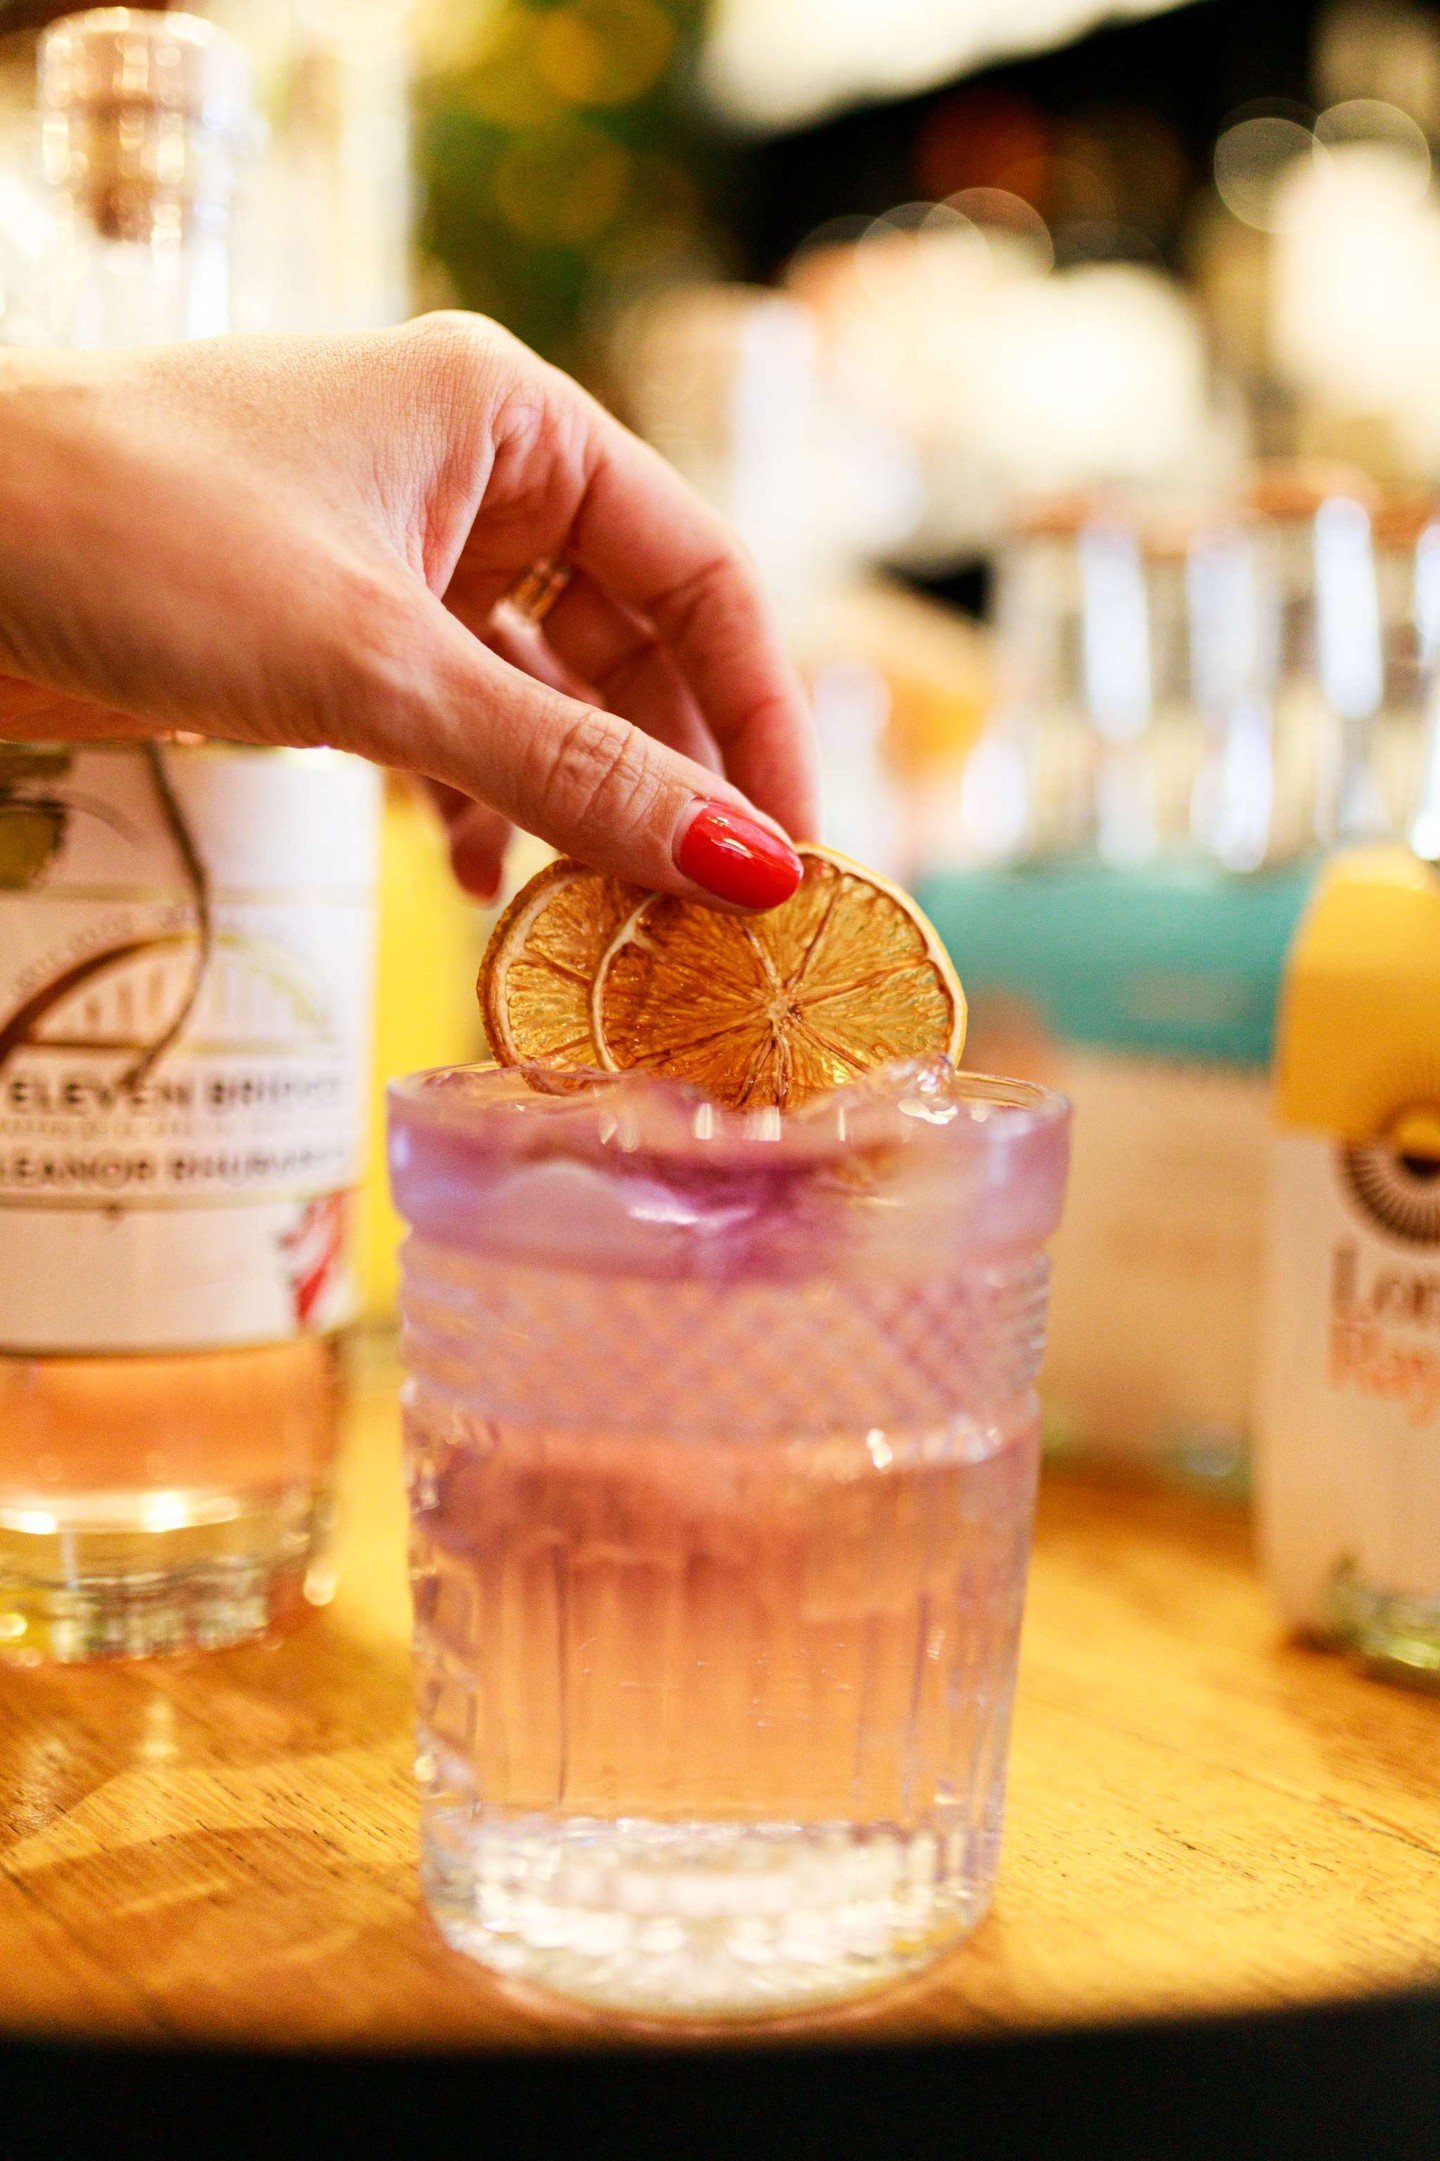 A refreshing sip... how could you resist?! 🙌😍

Made 100% by hand from the base spirit up, our spirits are crafted onsite using only the best local ingredients.